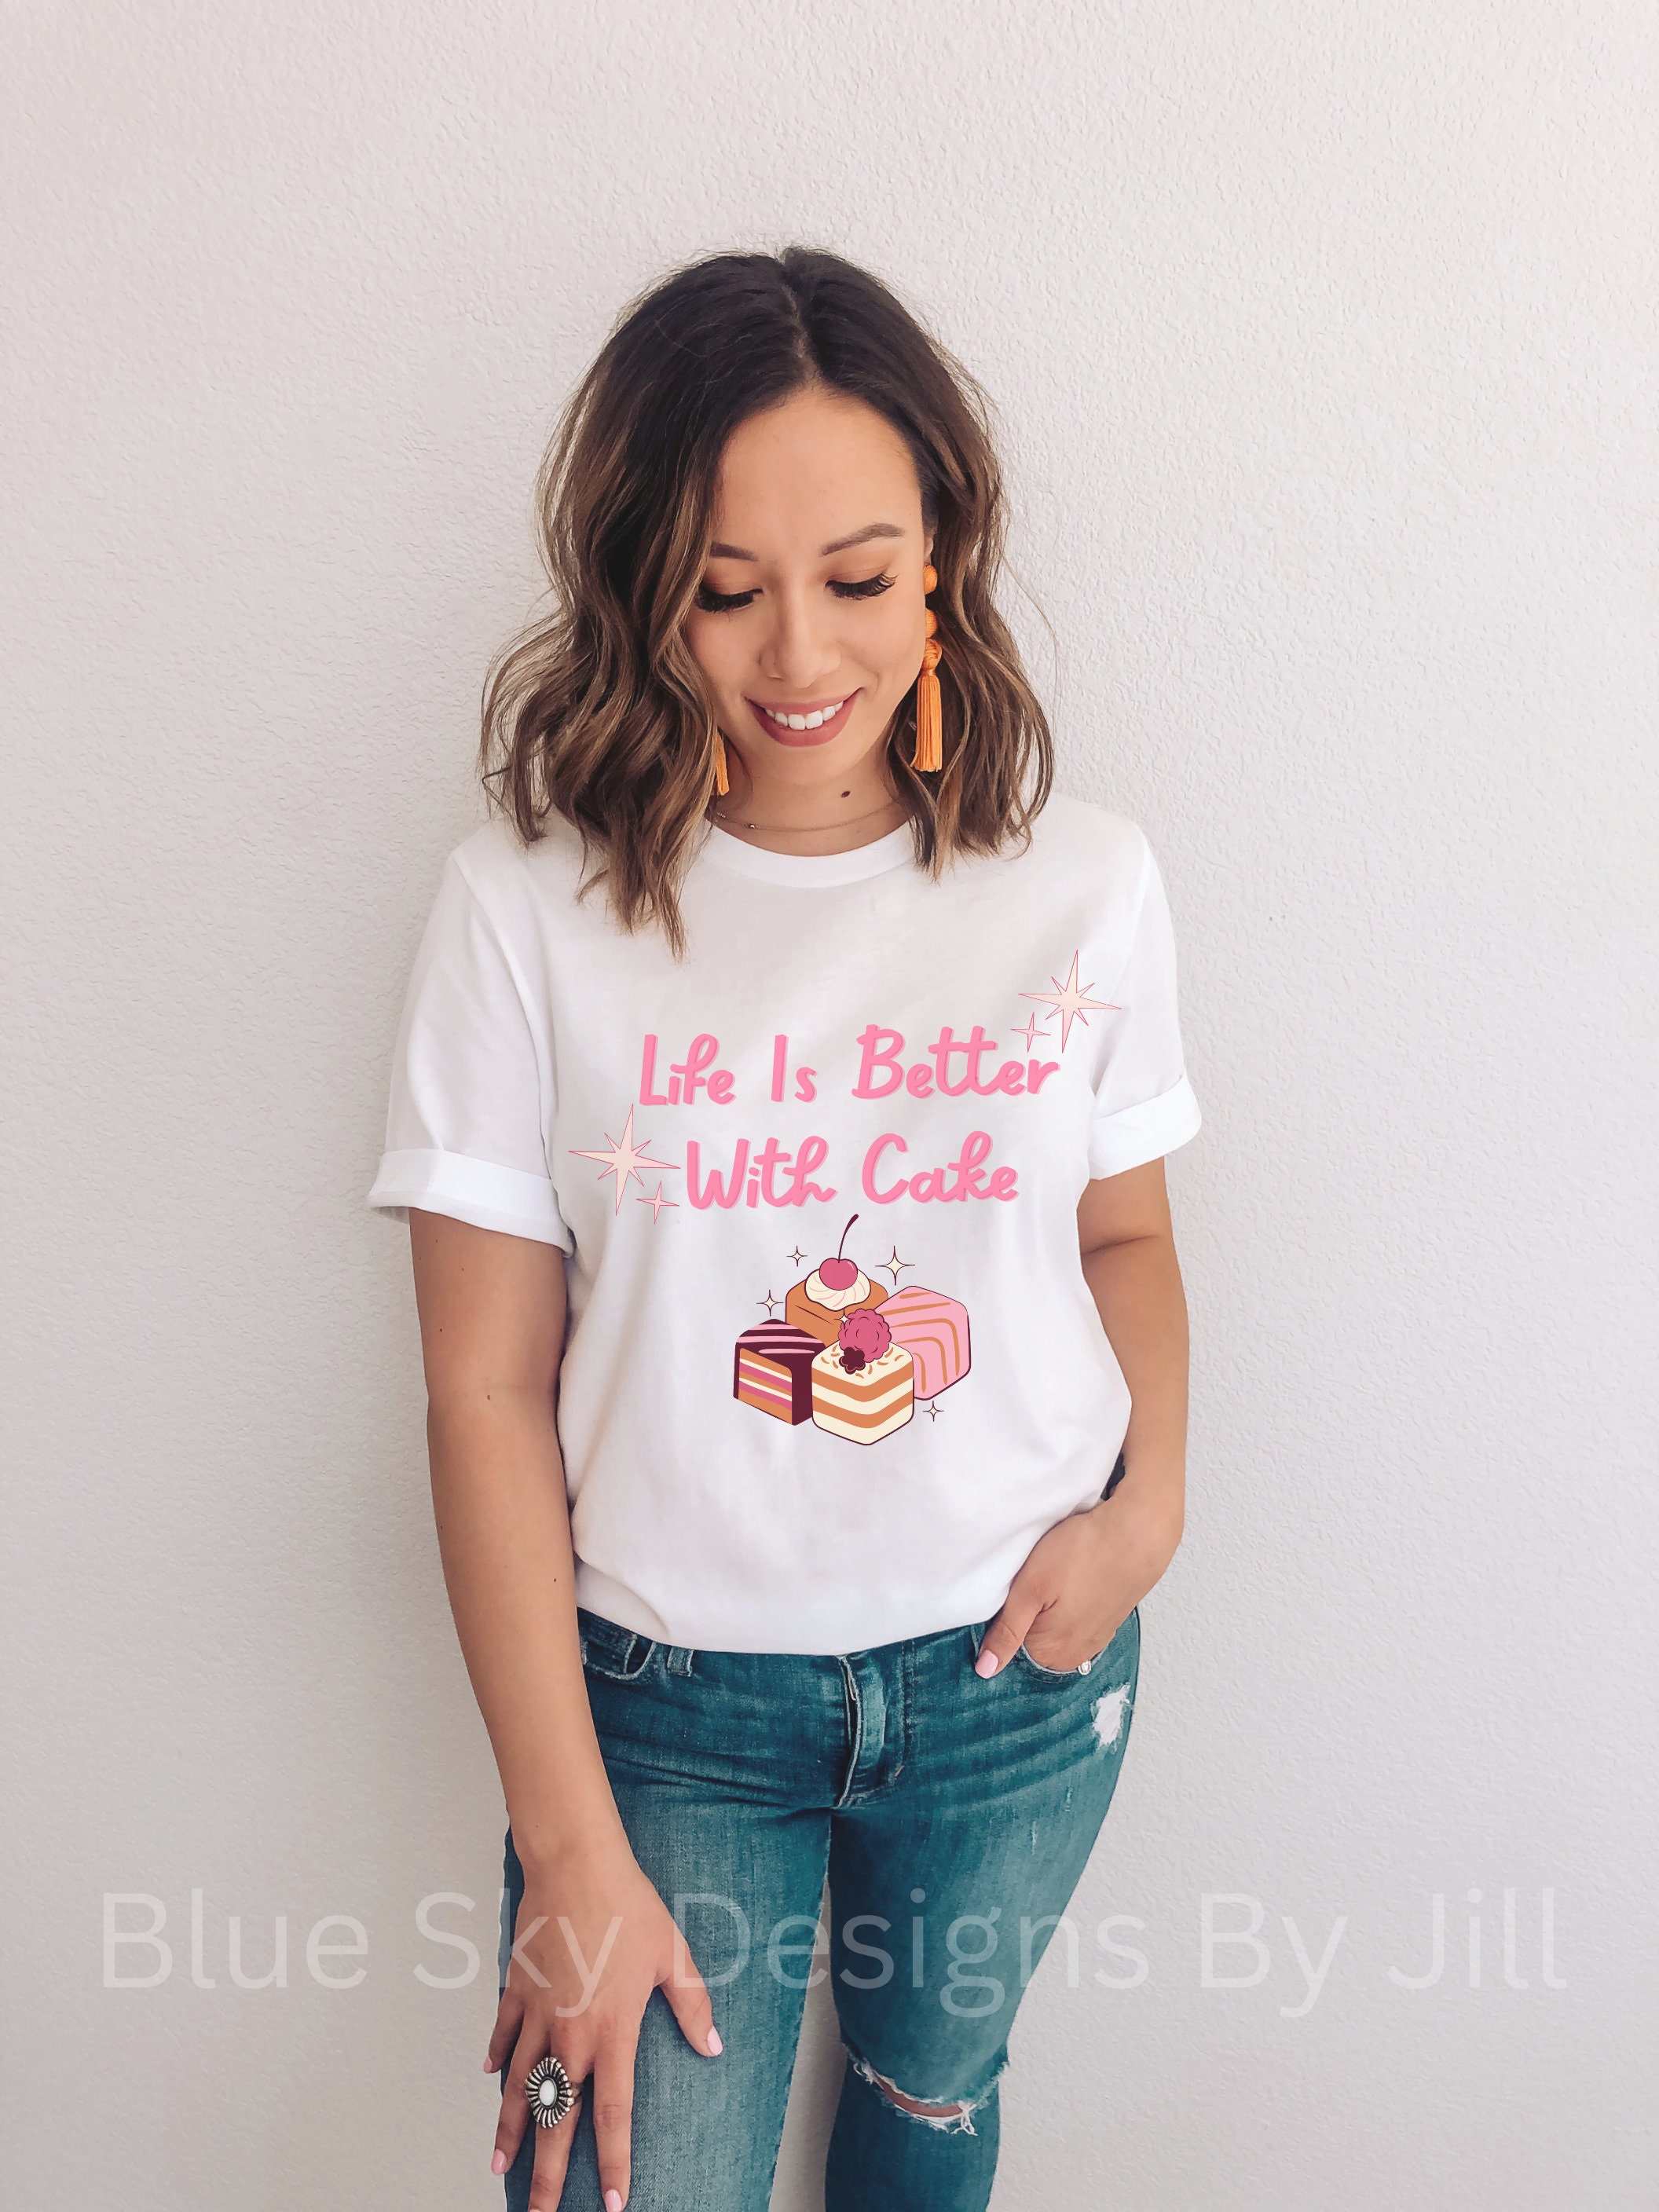 My Kitchen My Rules Tshirt - Chef Shirt - Cooking Tee - Funny Kitchen Gifts - Chef Gifts for Women - Gift for Baker - Cooking Gift - 3211p